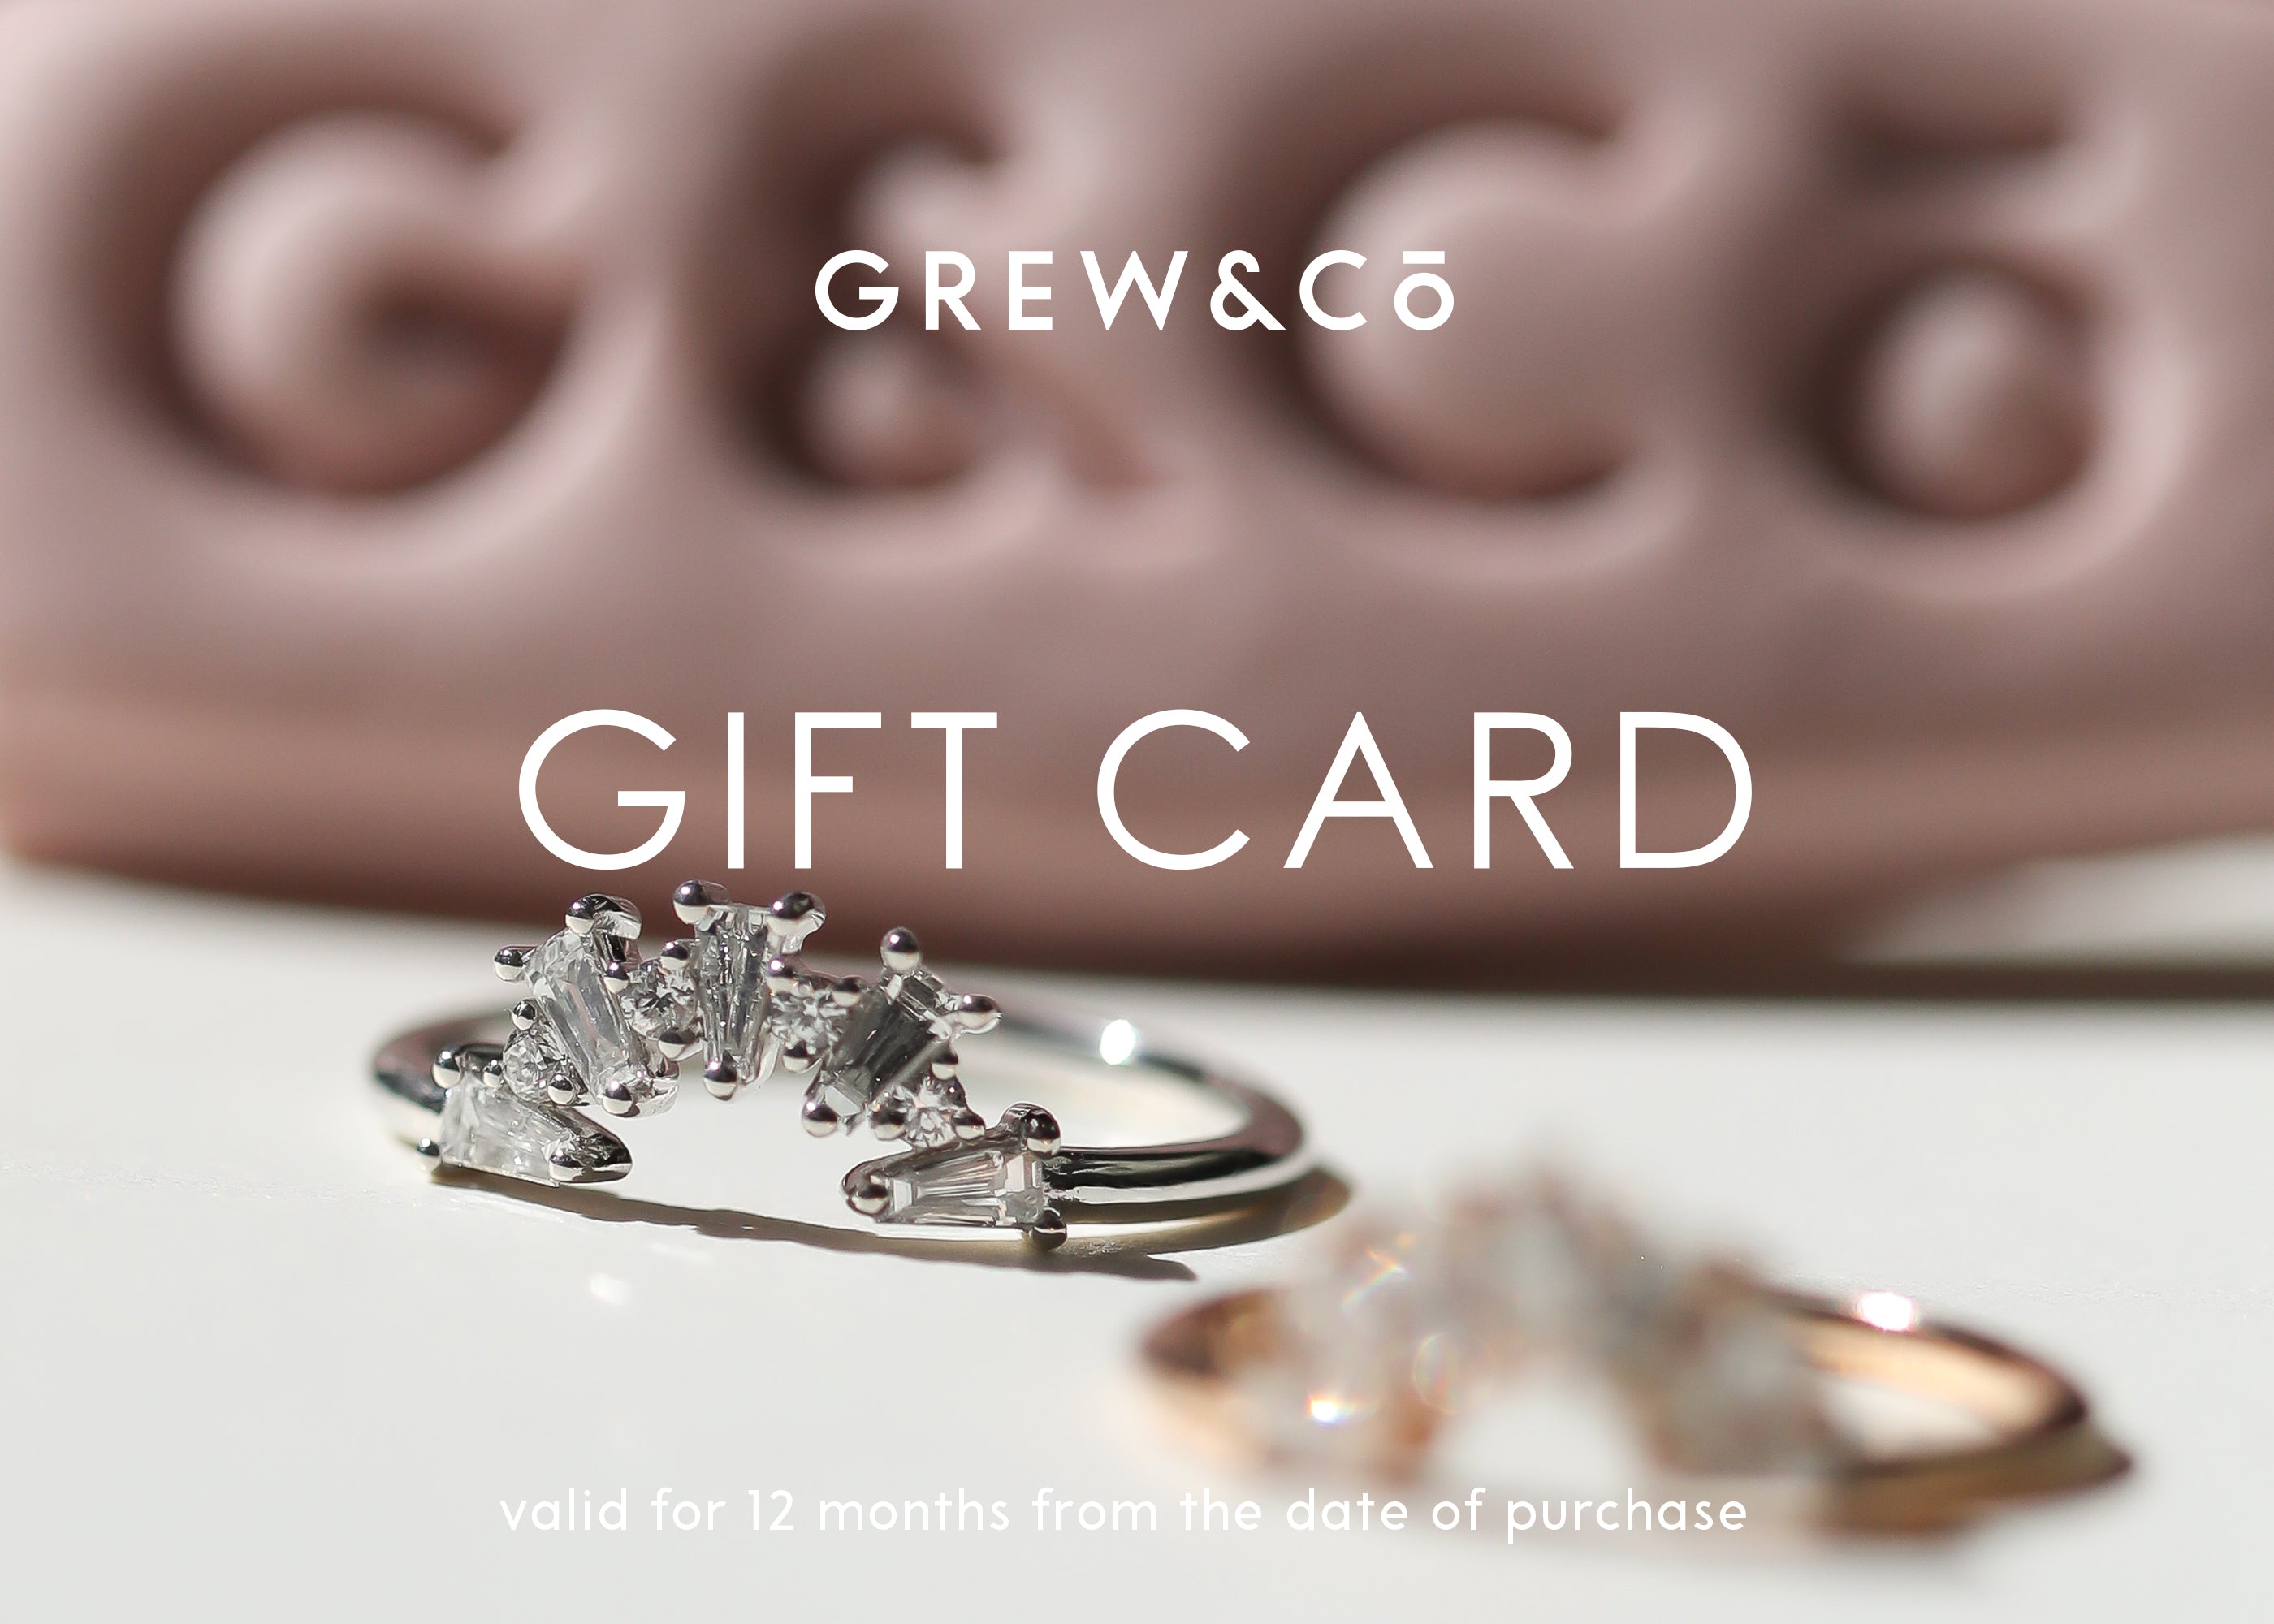 Grew and Co gift card